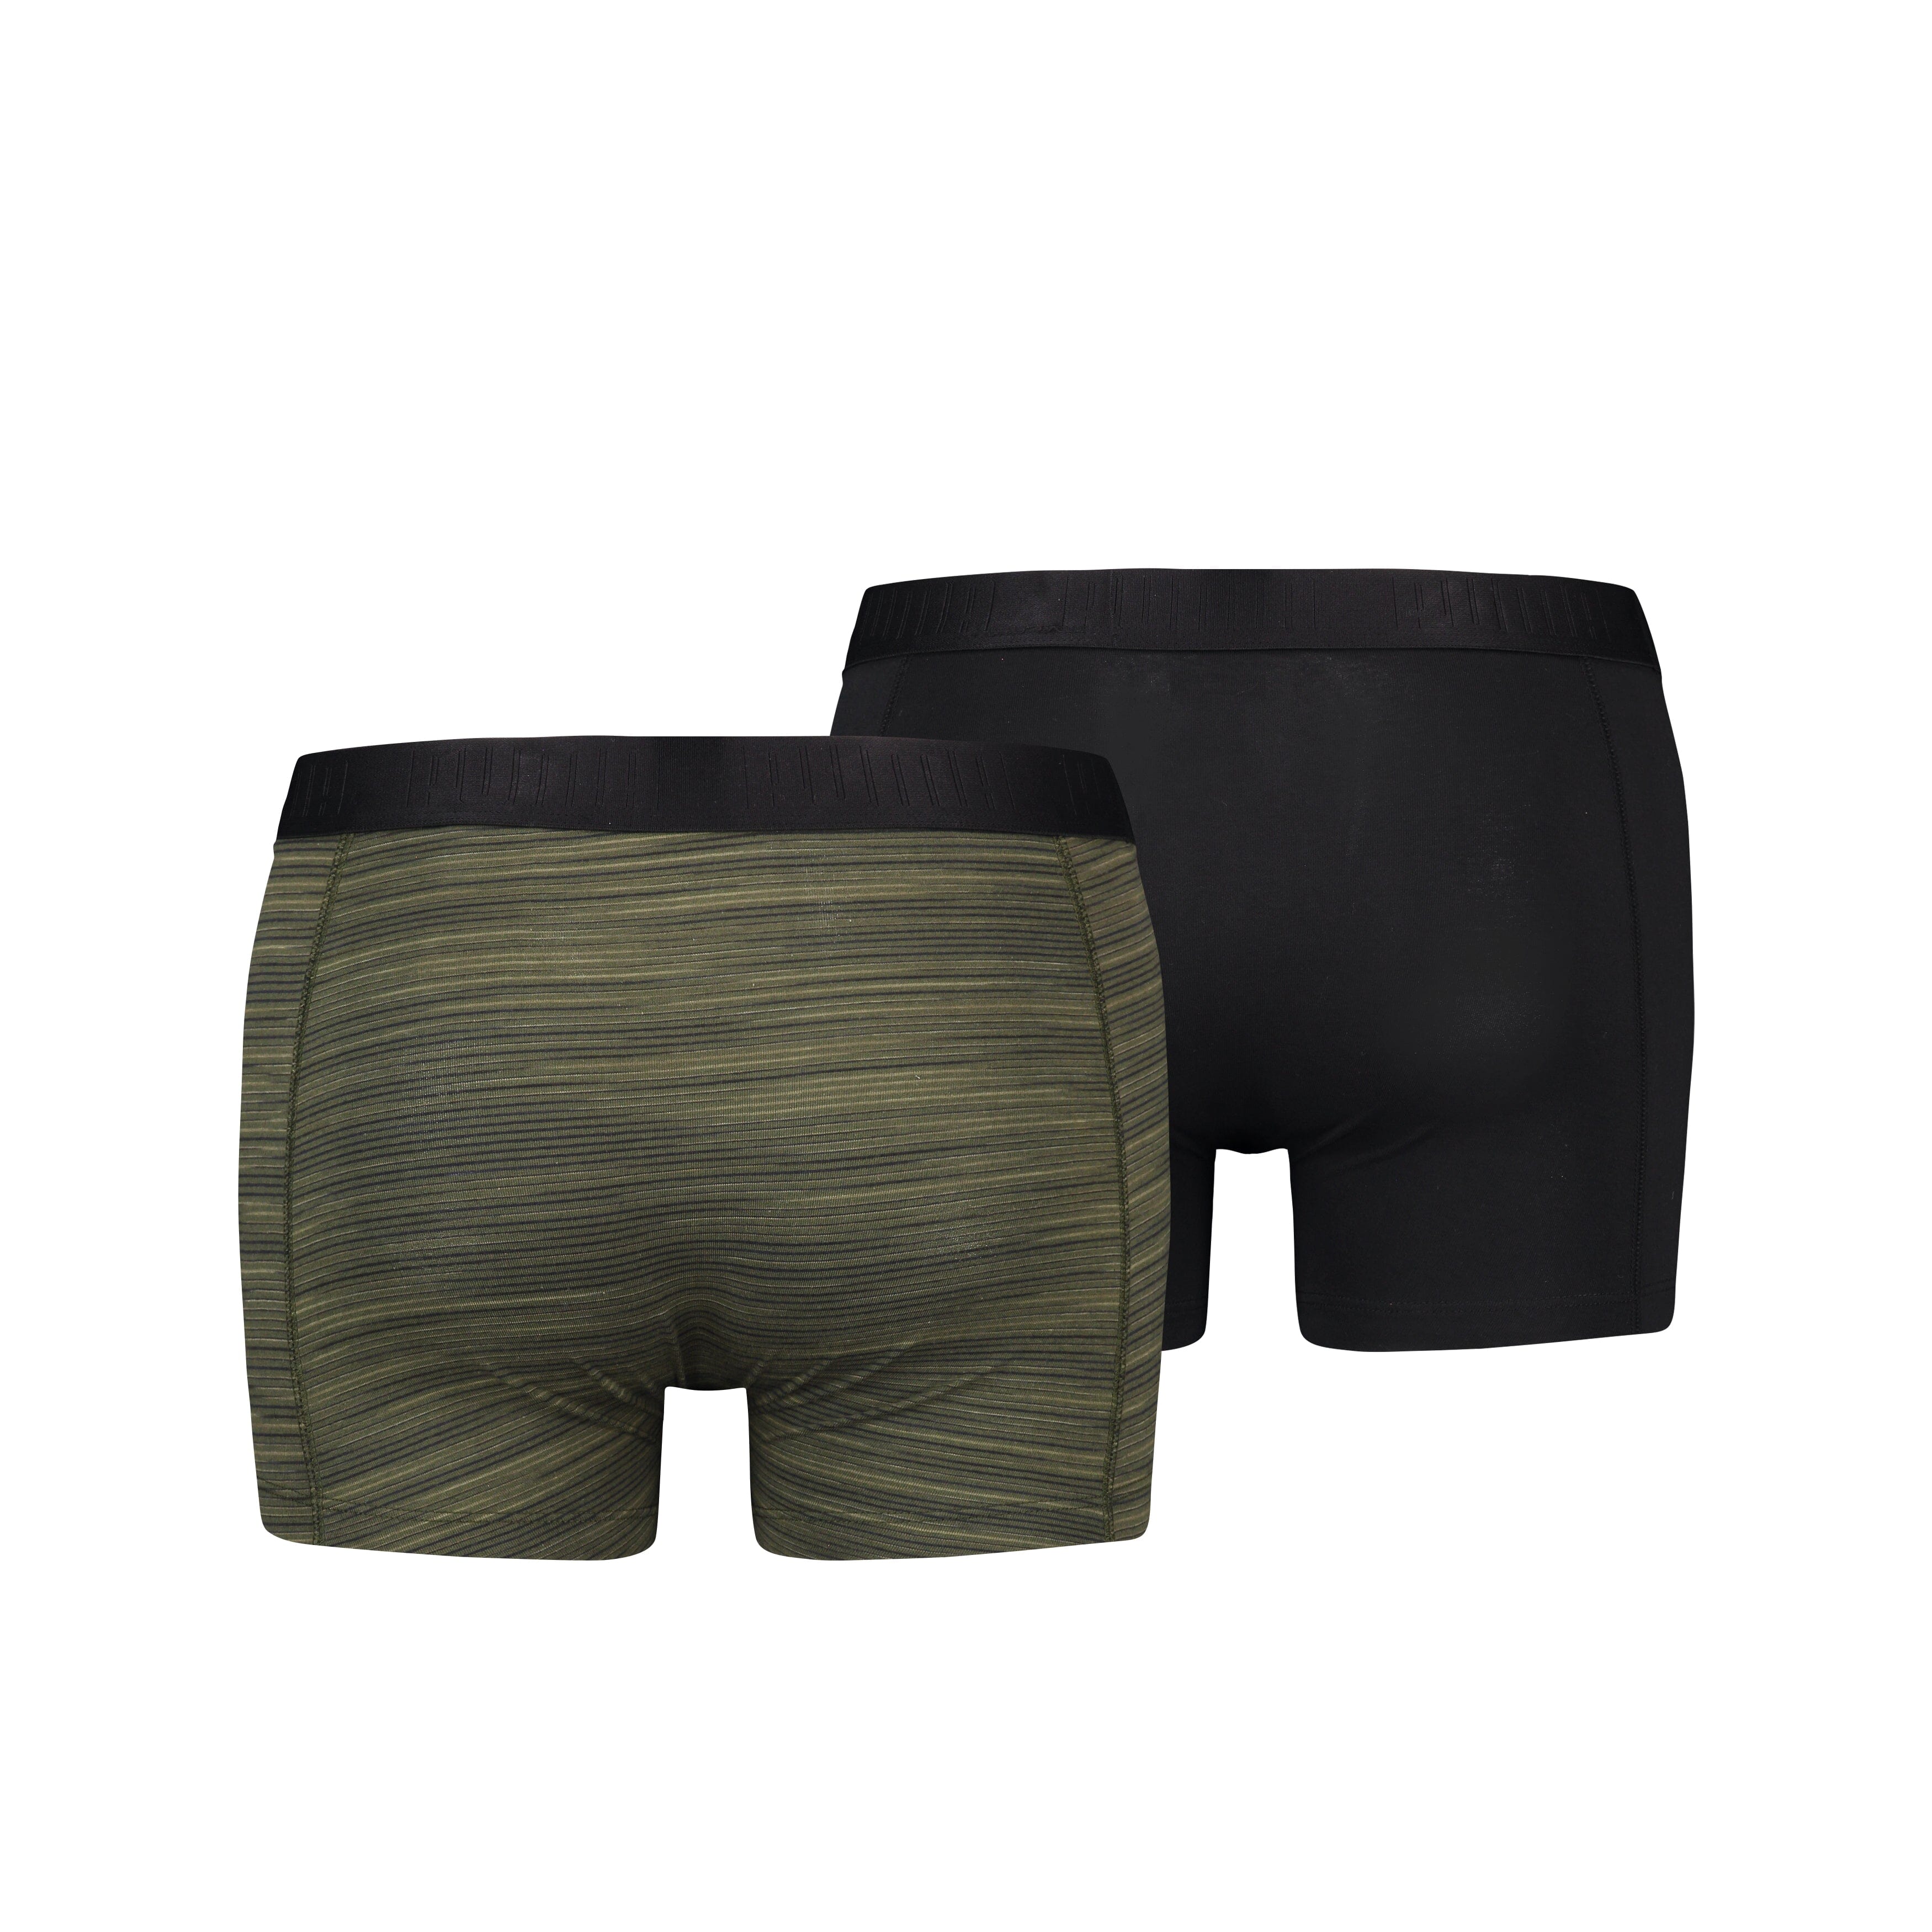 Puma - Space Dye Boxer 2-pack - Forest Night Combo Boxershort Puma 